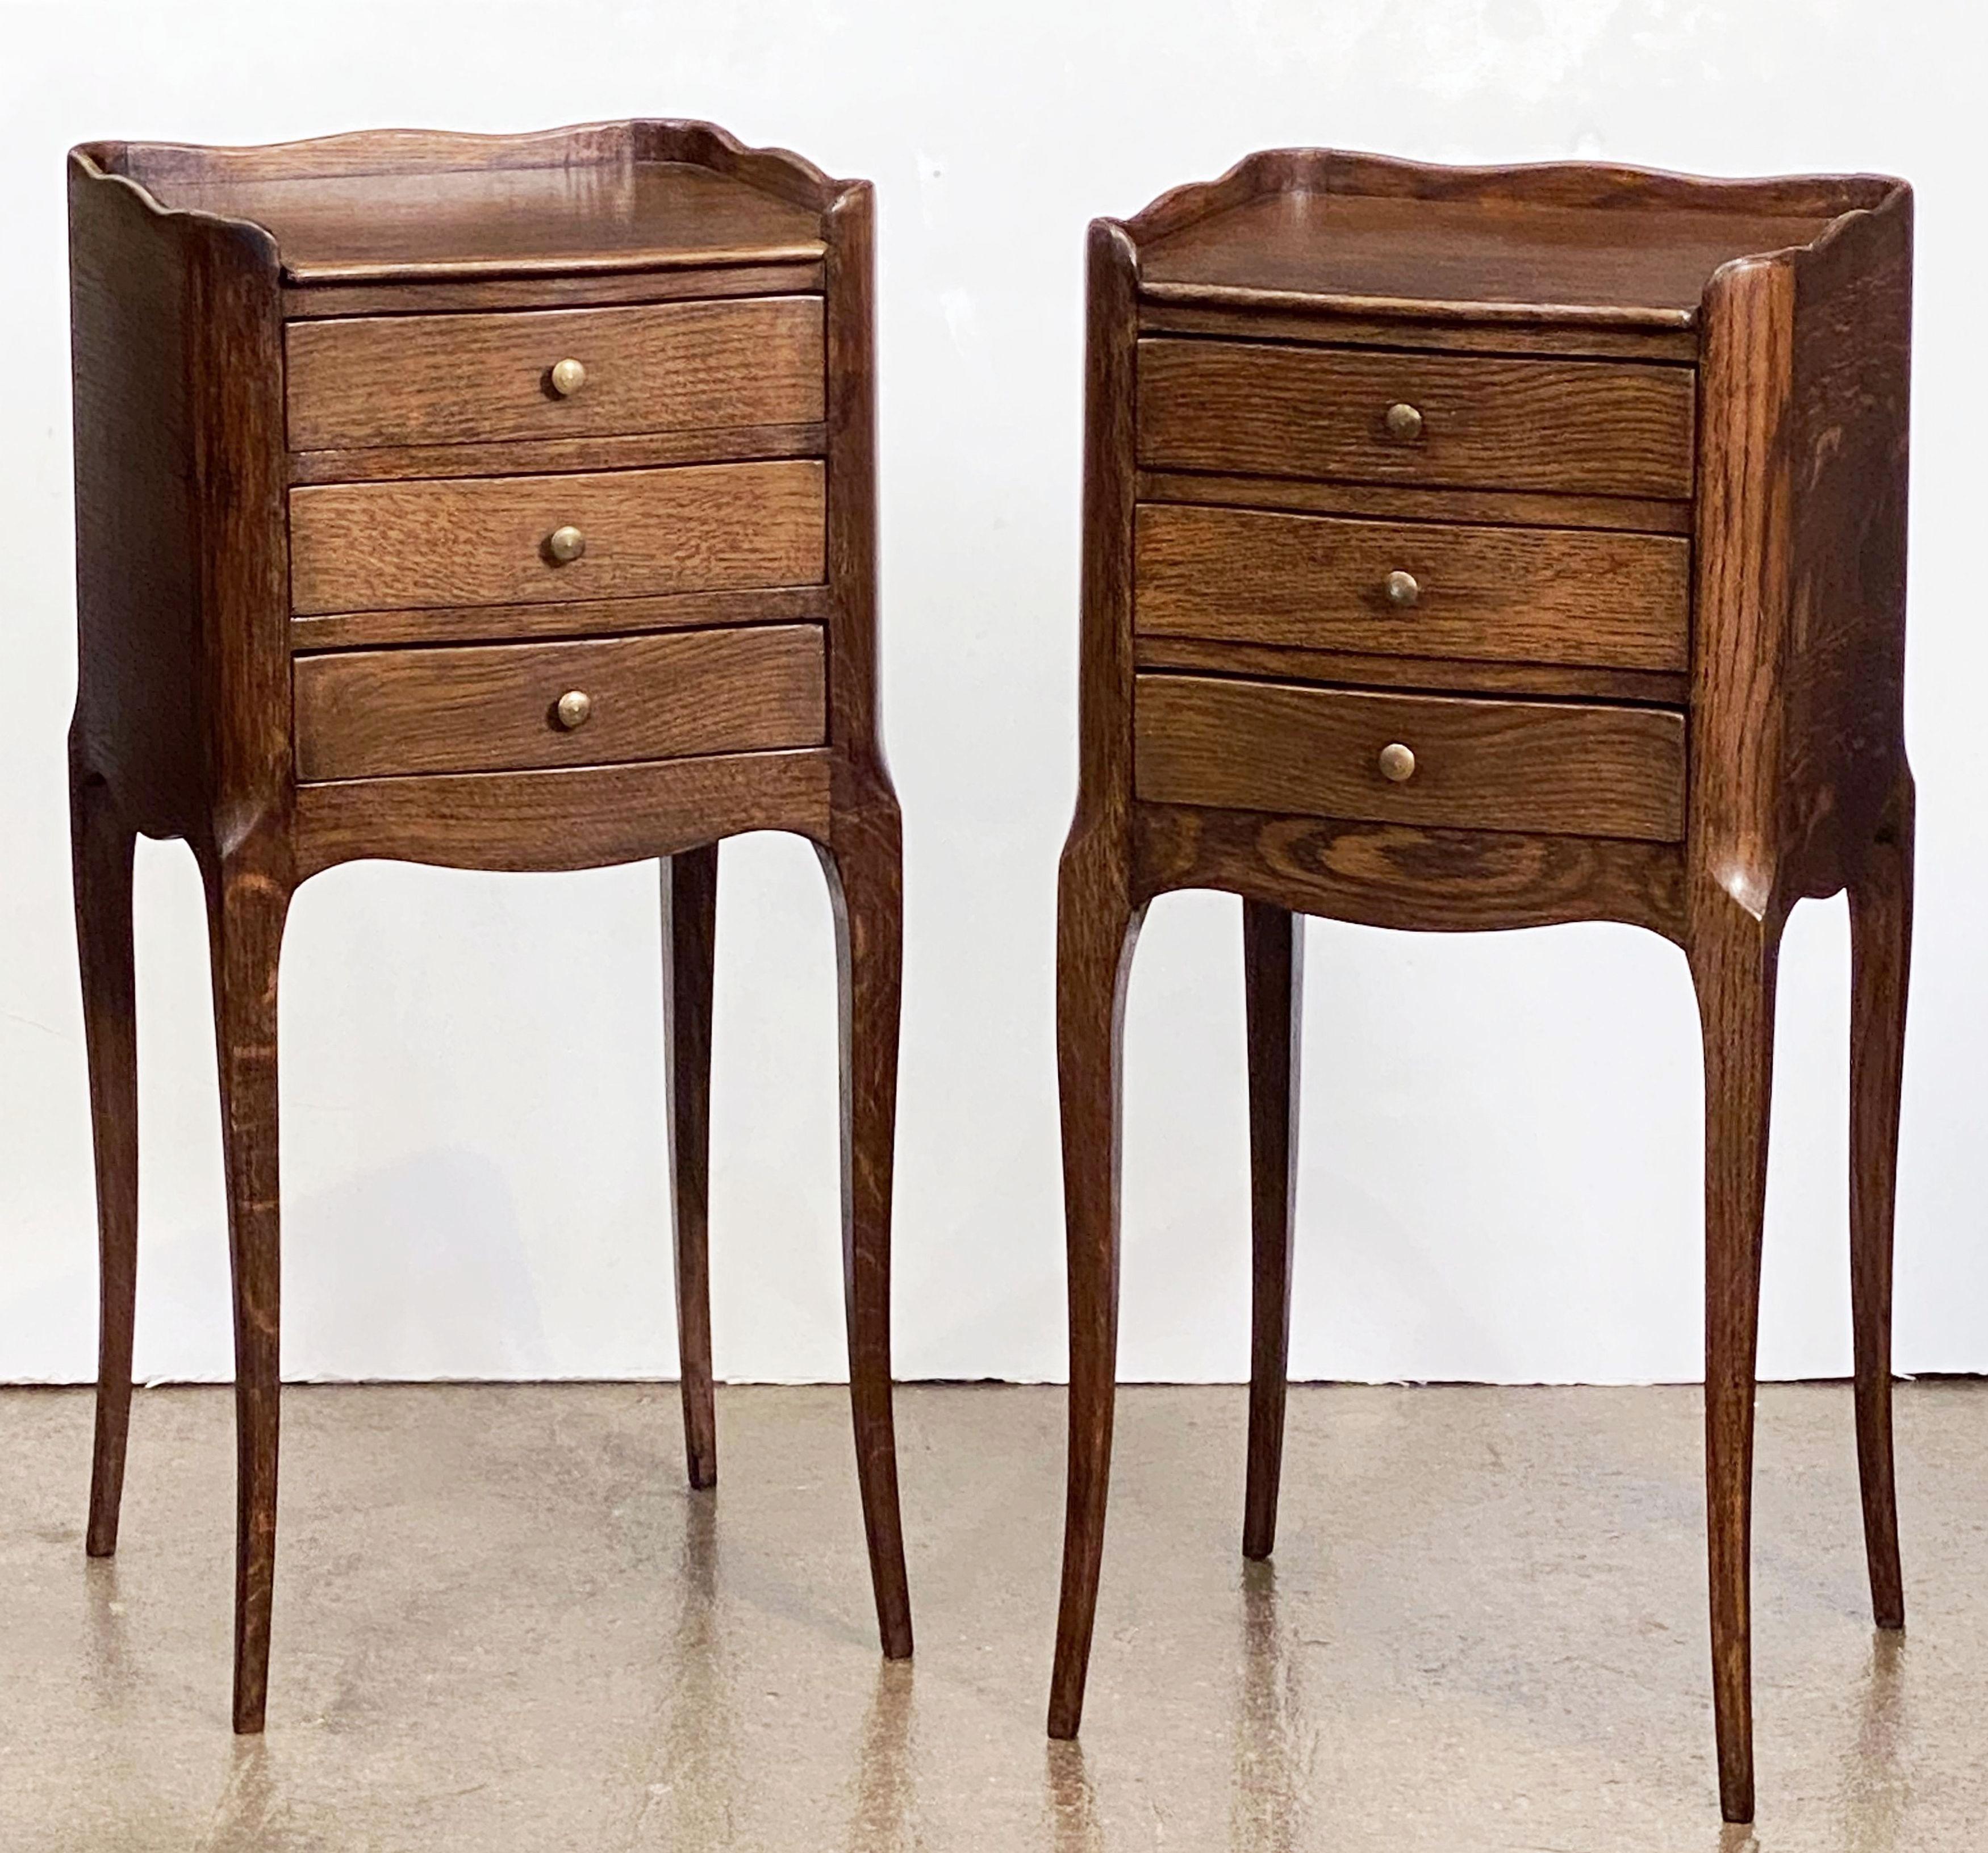 A fine pair of French bedside end tables or nightstands of oak, each stand featuring with scalloped edge gallery over a frieze of three drawers with brass pulls, apron bottom, and set upon four tapering cabriole legs.

Priced as a pair - $3895 the